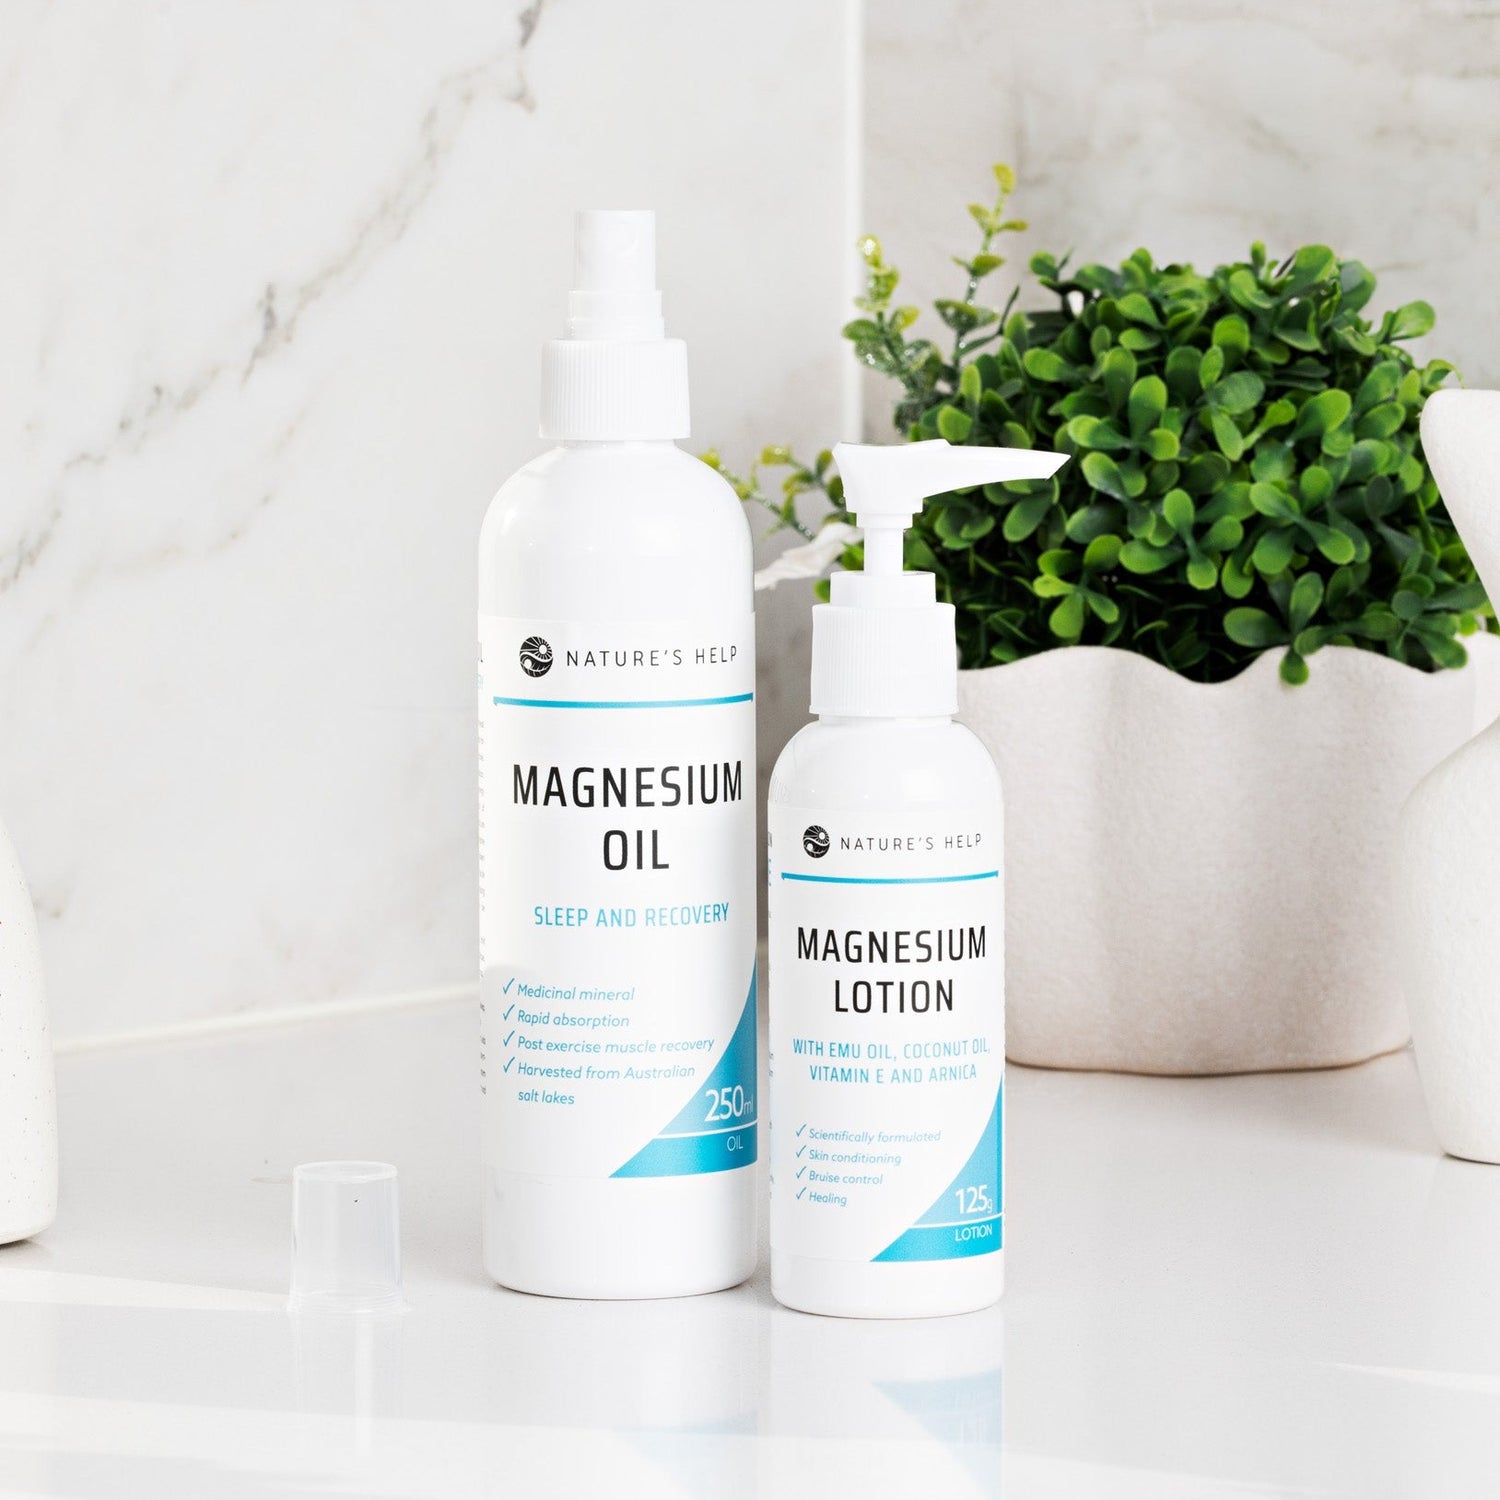 Magnesium Lotion with Emu &amp; Coconut Oil – 125g